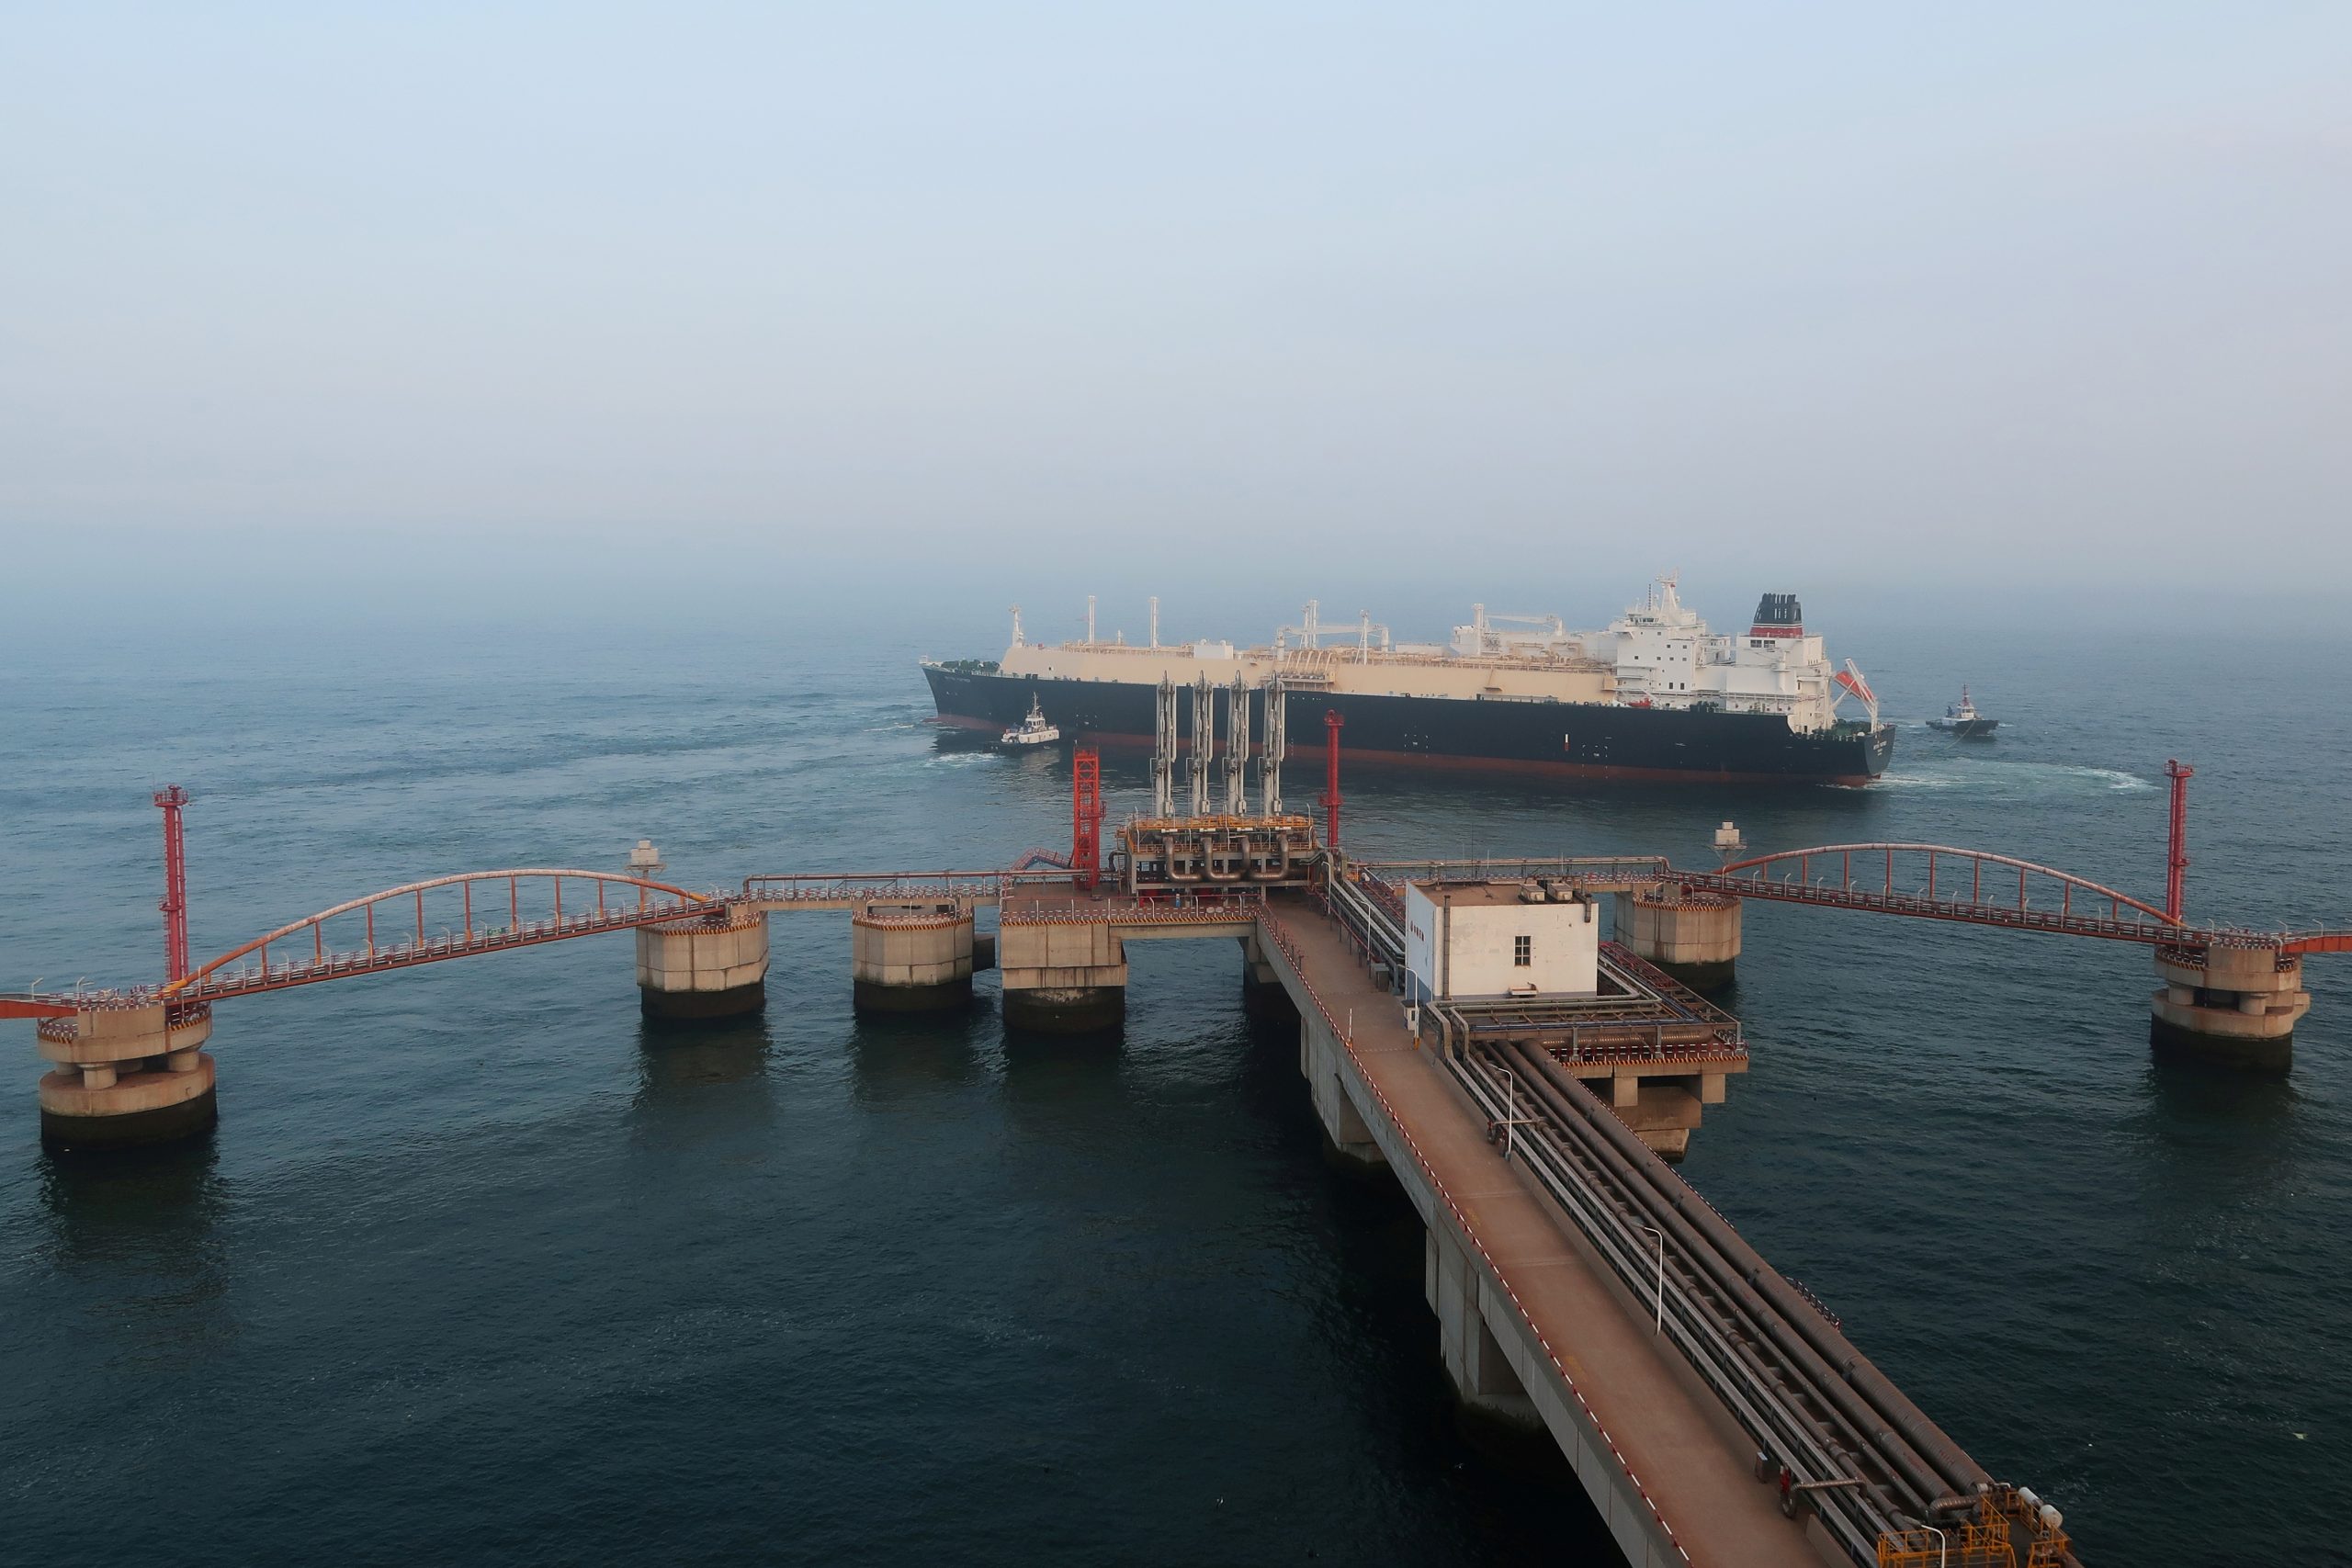 FILE PHOTO: A liquified natural gas (LNG) tanker leaves the dock after discharge at PetroChina's receiving terminal in Dalian FILE PHOTO: A liquified natural gas (LNG) tanker leaves the dock after discharge at PetroChina's receiving terminal in Dalian, Liaoning province, China July 16, 2018.  REUTERS/Chen Aizhu/File Photo Aizhu Chen